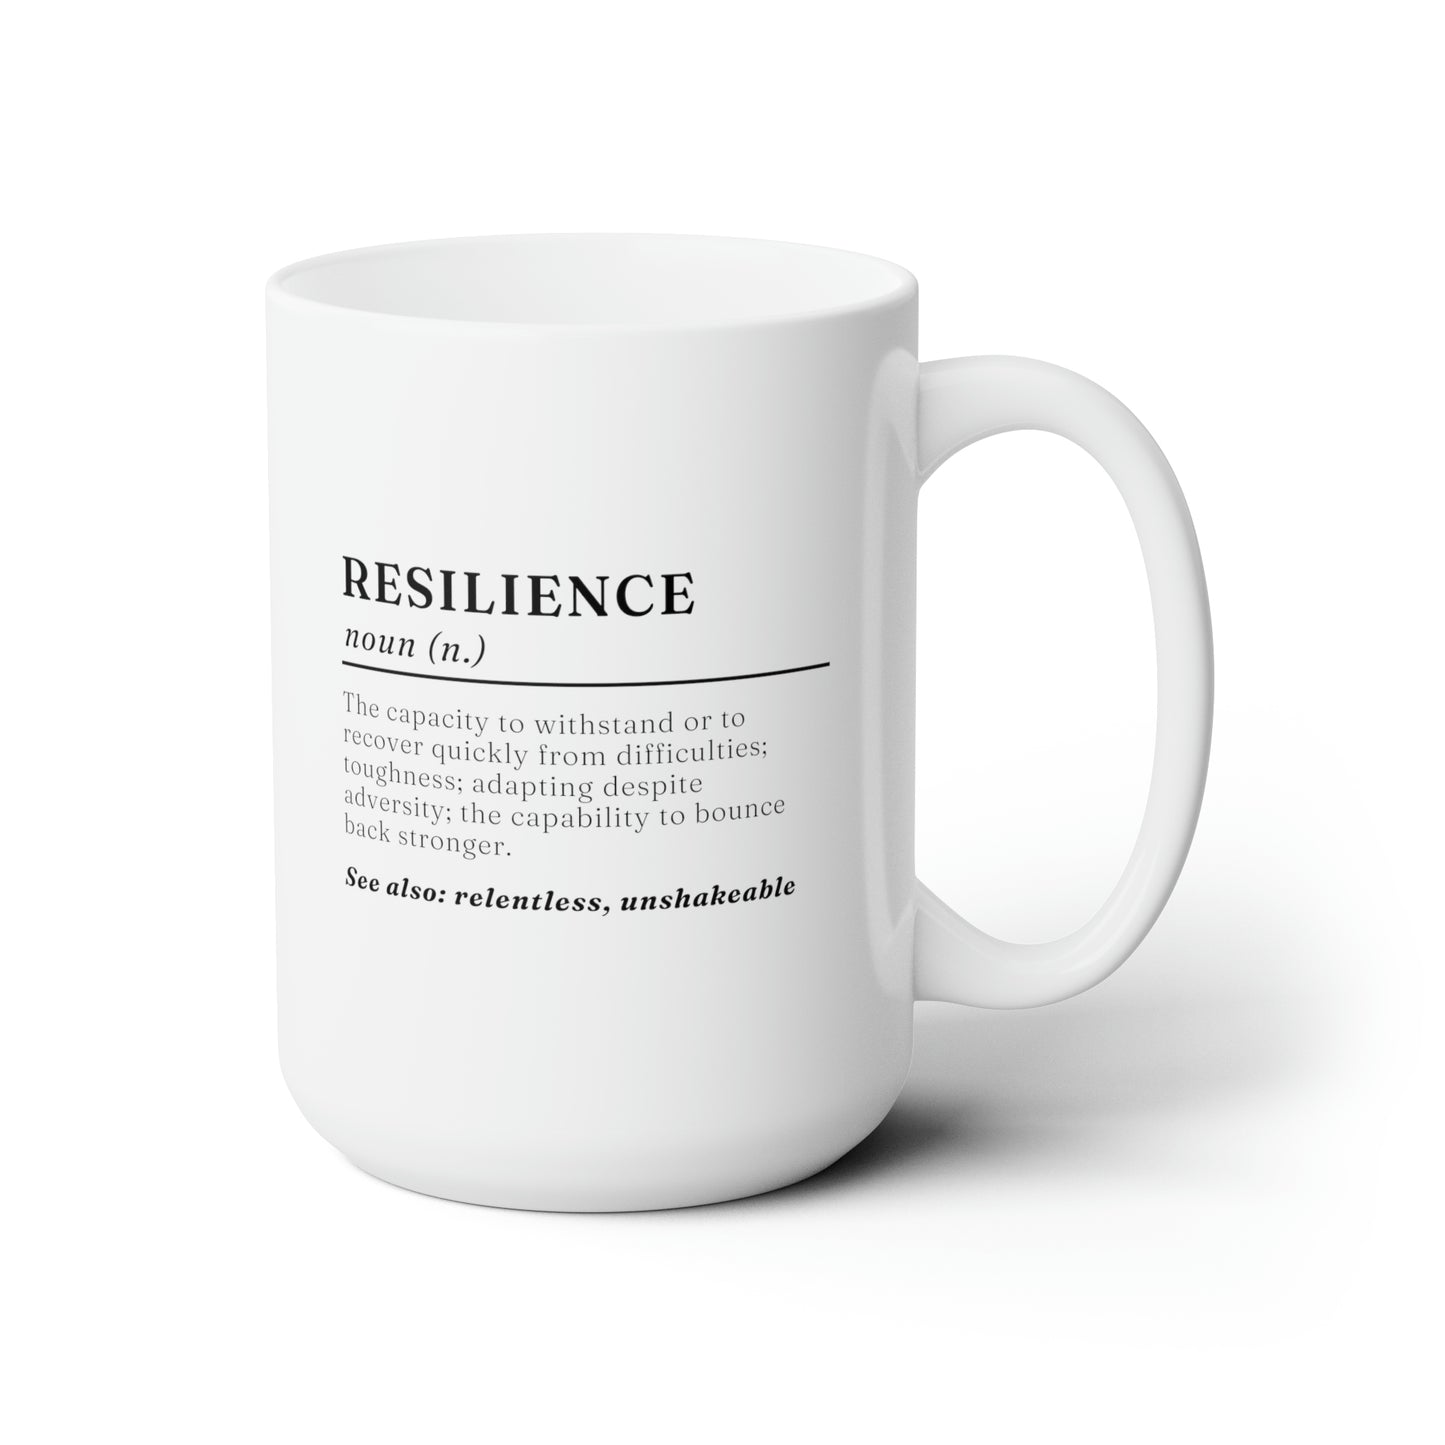 Resilience Definition 15oz white funny large coffee mug gift for friend support perseverance meaning motivational inspirational tough waveywares wavey wares wavywares wavy wares